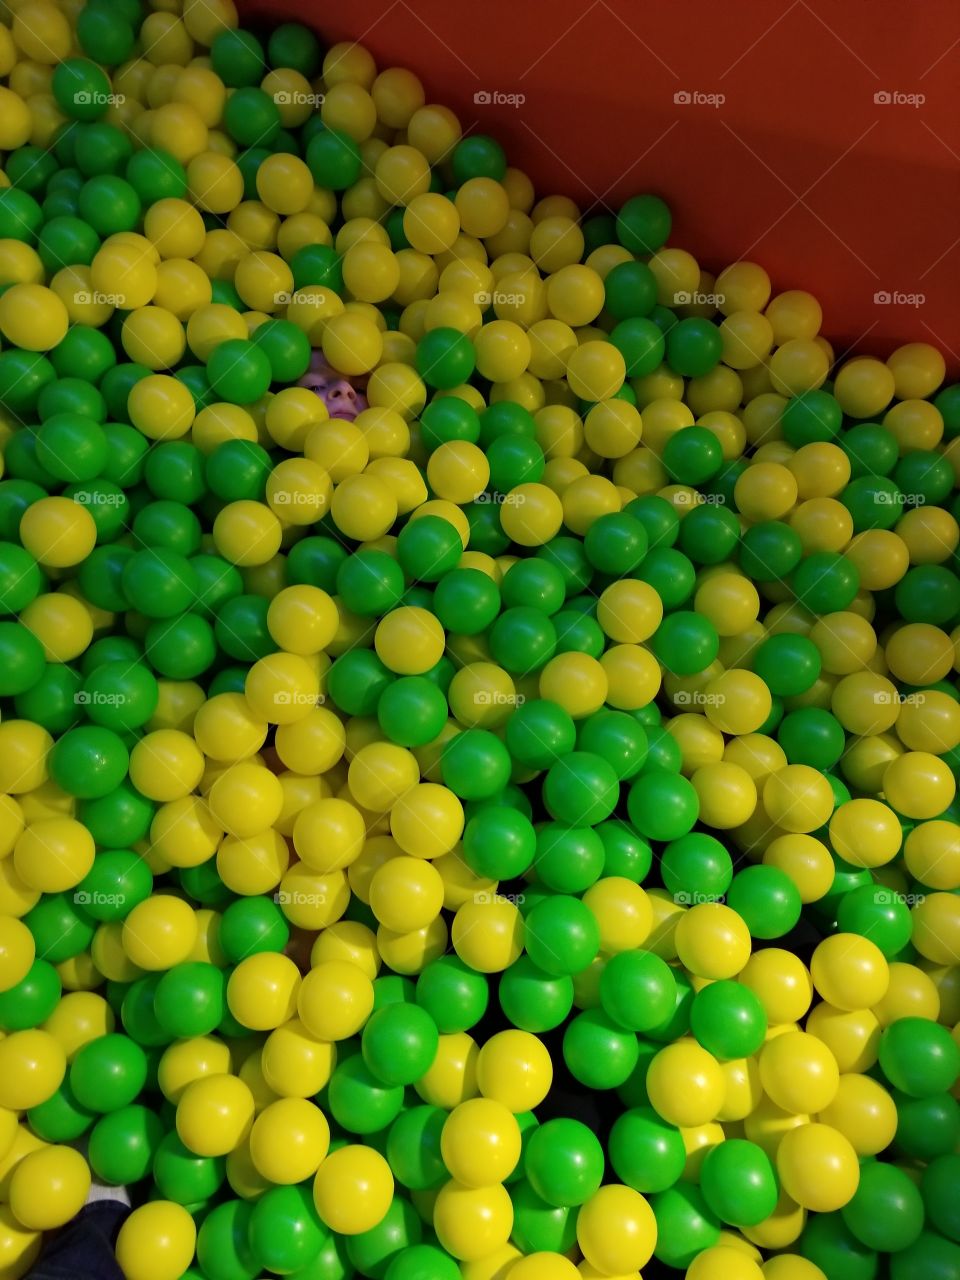 Green and yellow ball pit with a hidden face